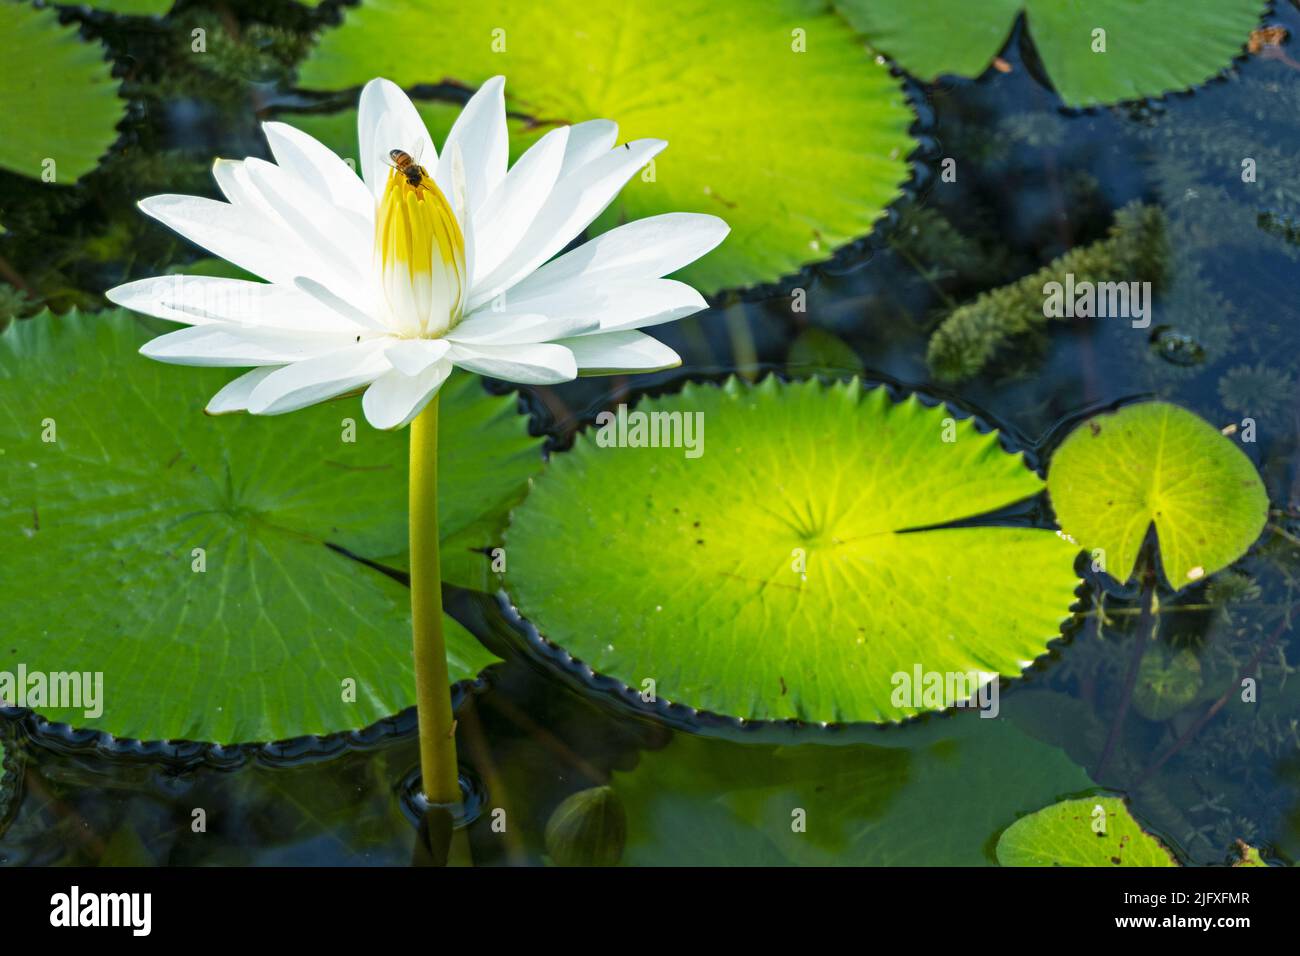 White lotus with yellow pollen on the surface of the pond Stock Photo